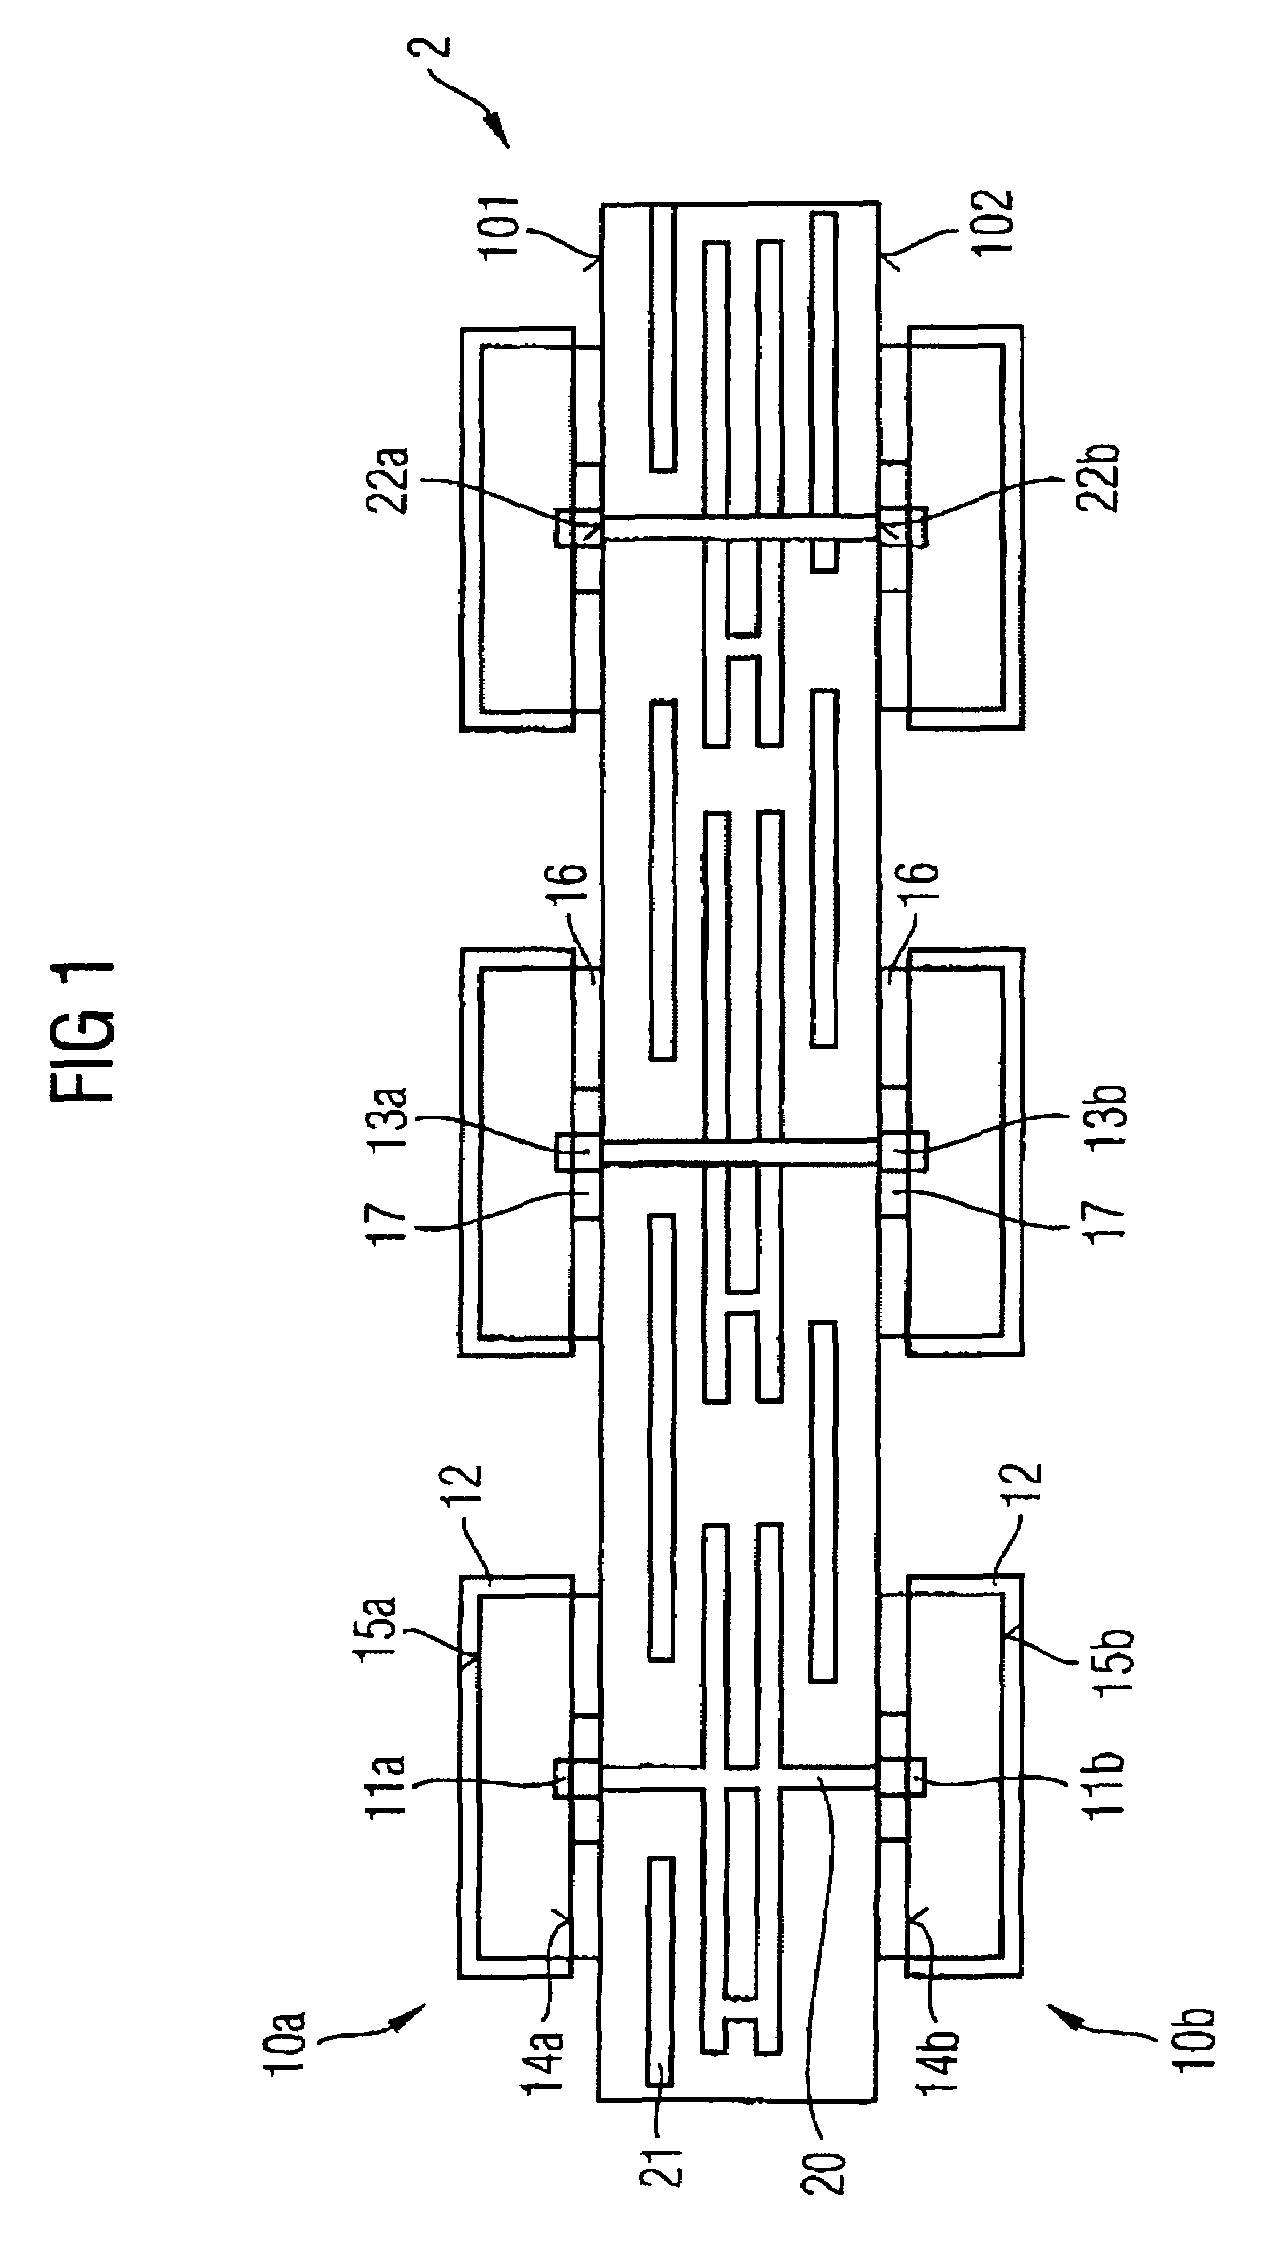 Semiconductor device with semiconductor components connected to one another